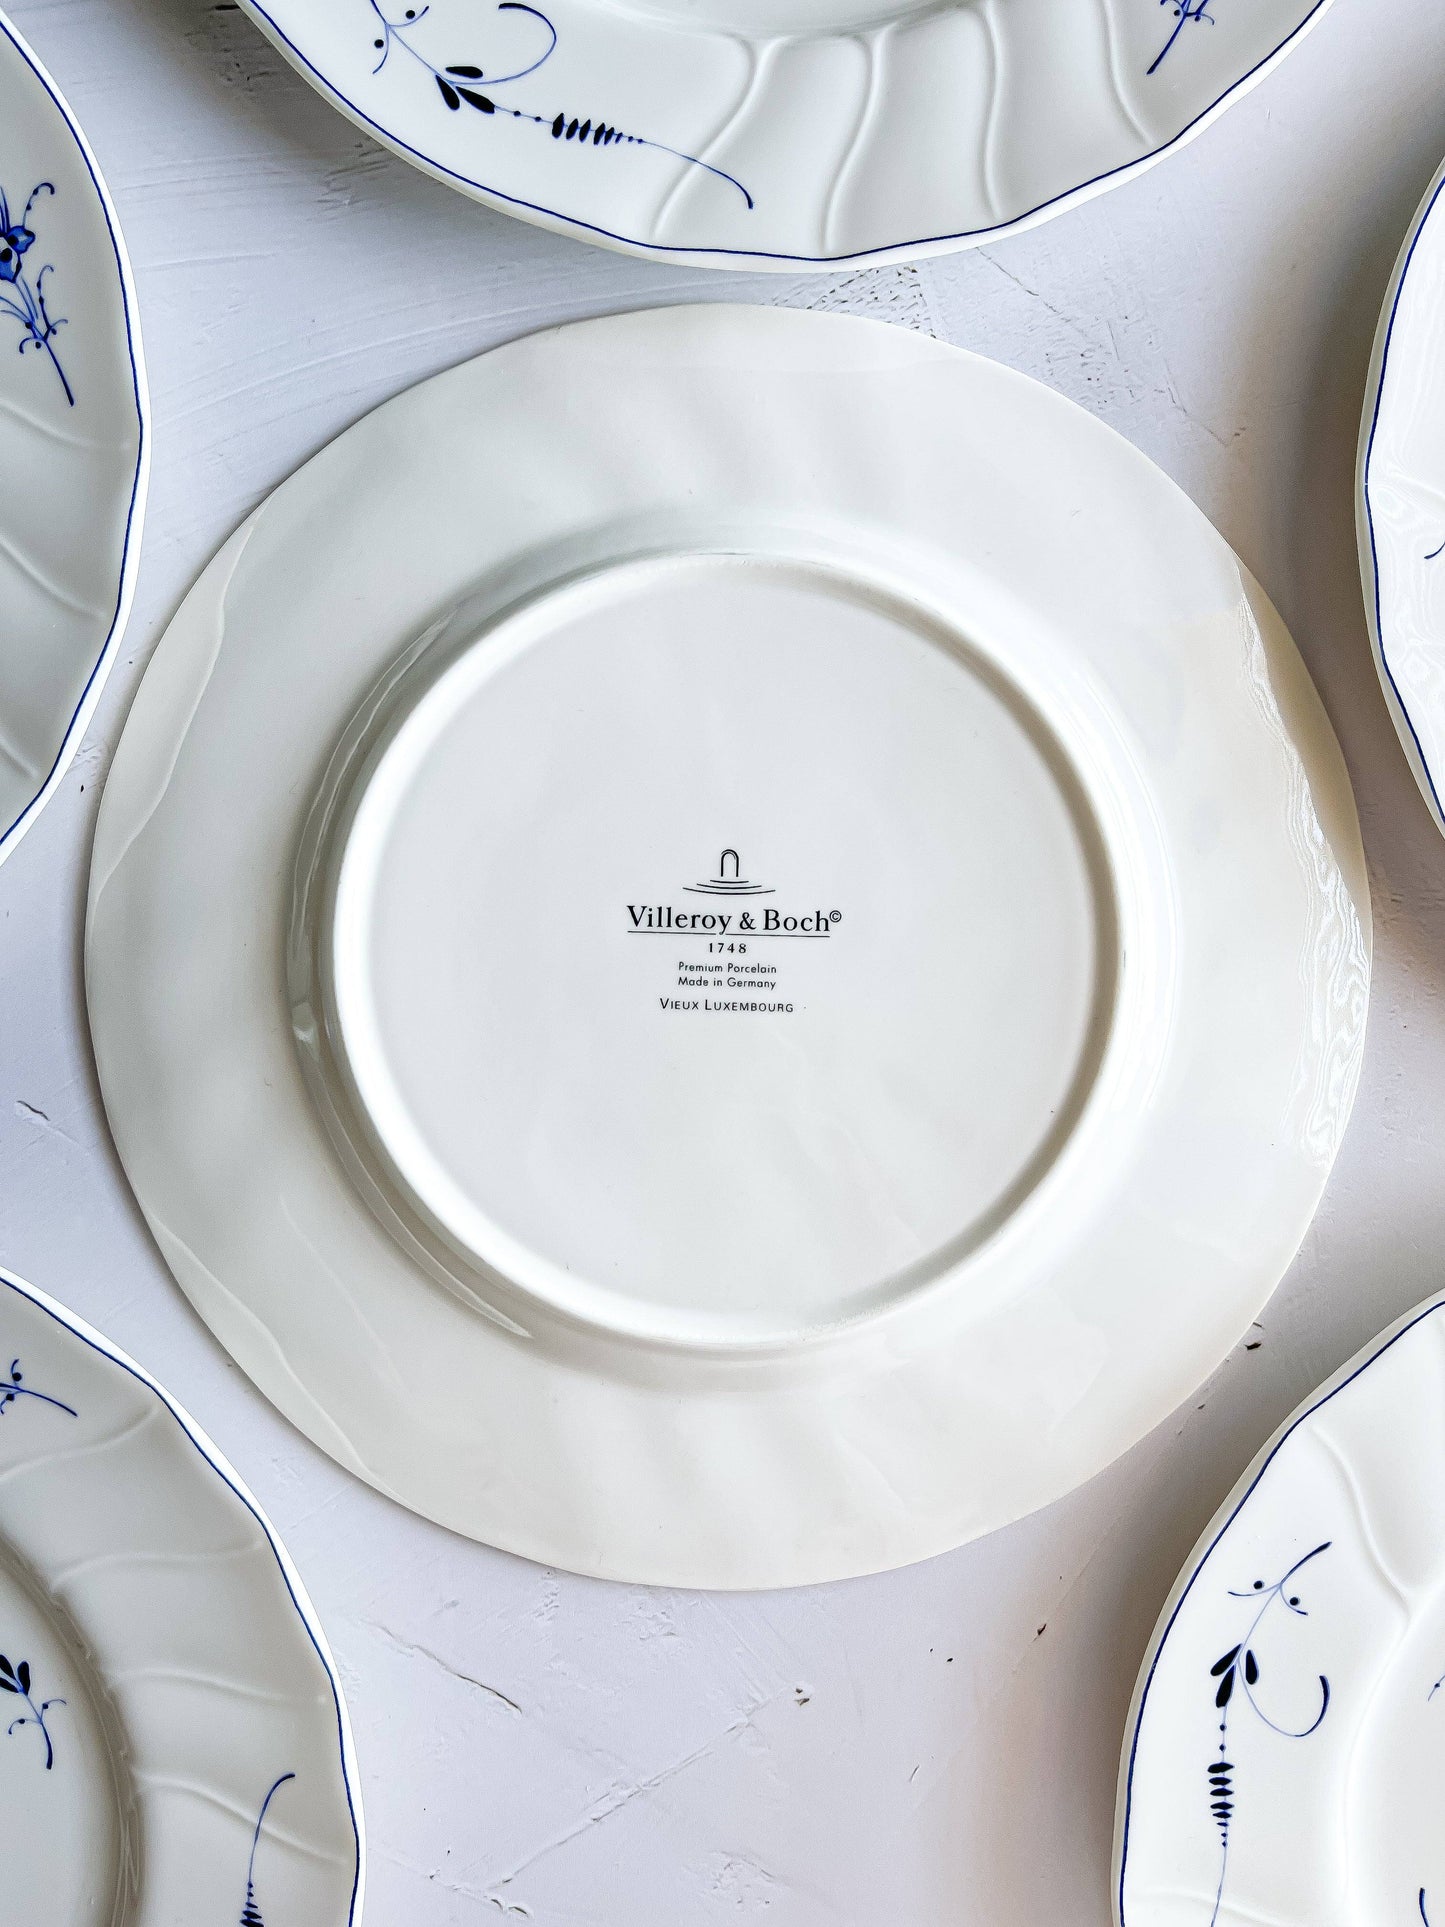 Villeroy & Boch 'Vieux Luxembourg' Dinner Plates - Set of 6 - SOSC Home